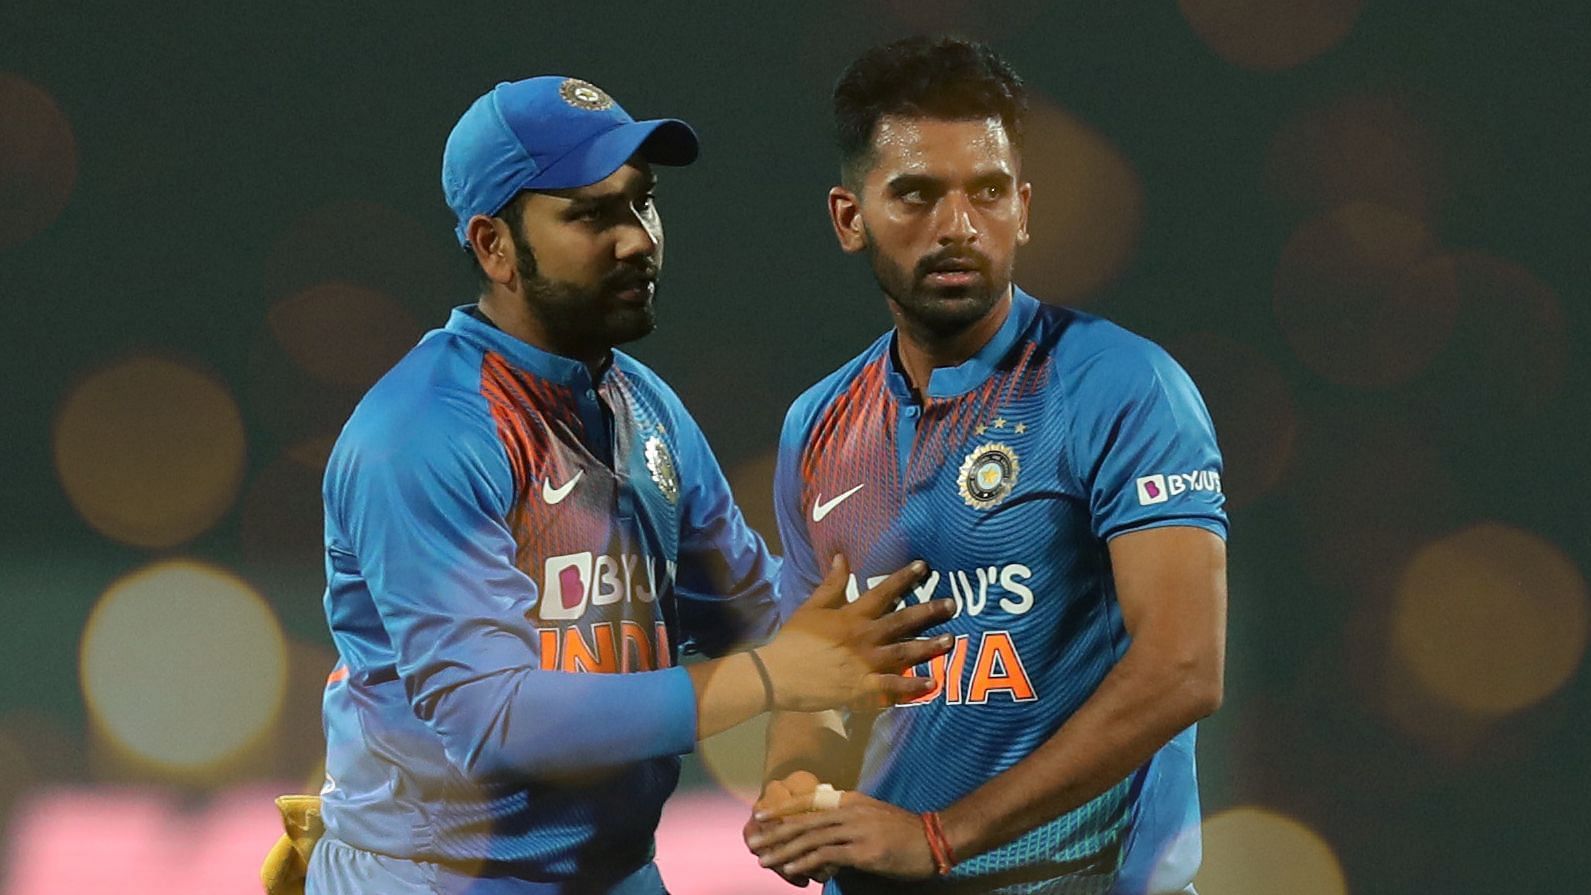 Here’s what Rohit Sharma said to Deepak Chahar that gave the Indian bowler the confidence to bowl a stellar spell against Bangladesh.